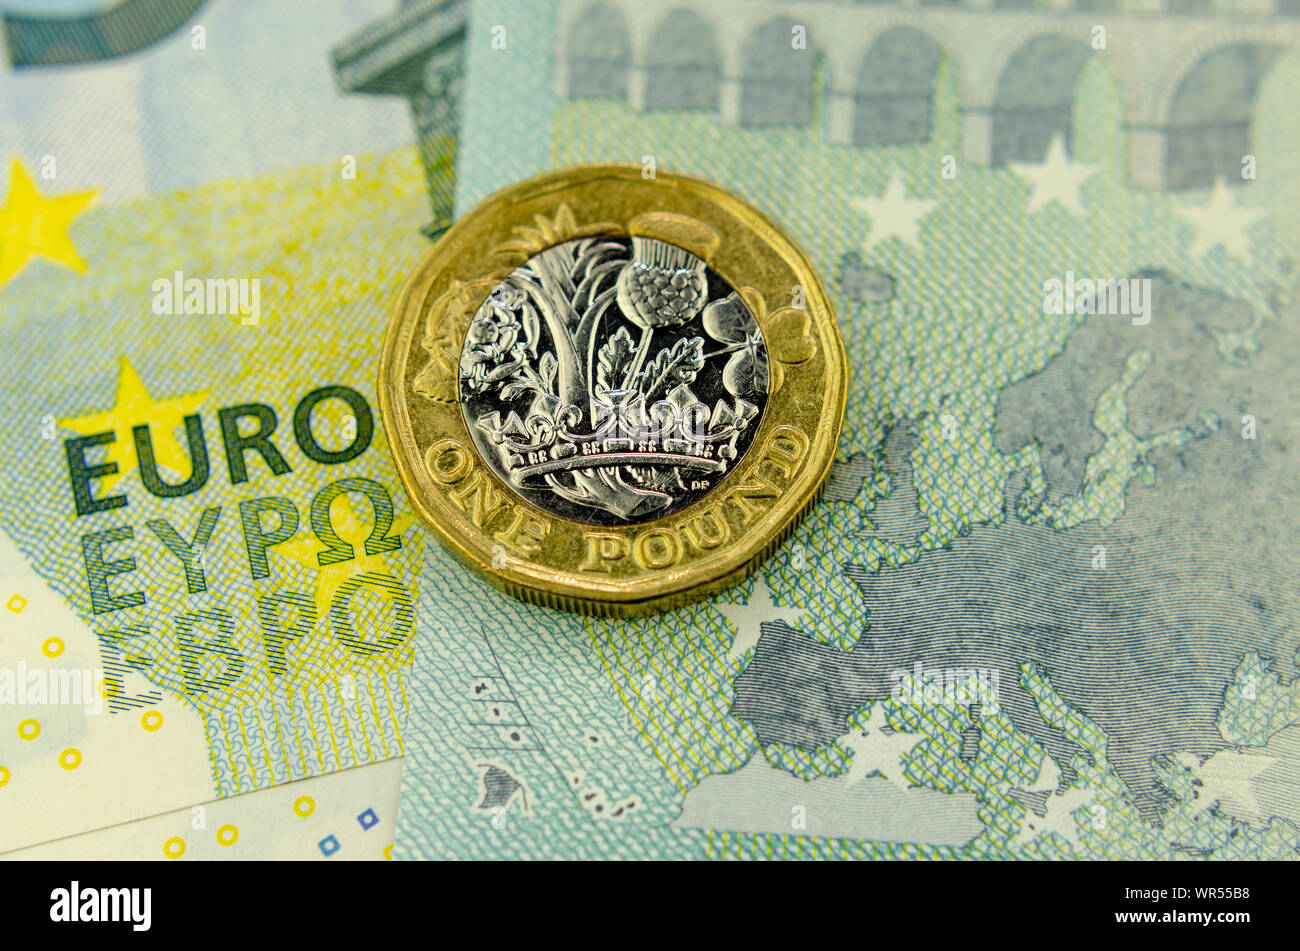 One pound coin on top of 5 Euros banknote, next to the map of the EU and words EURO. Flat lay view. Concept for currency exchange, finance or UK - EU Stock Photo